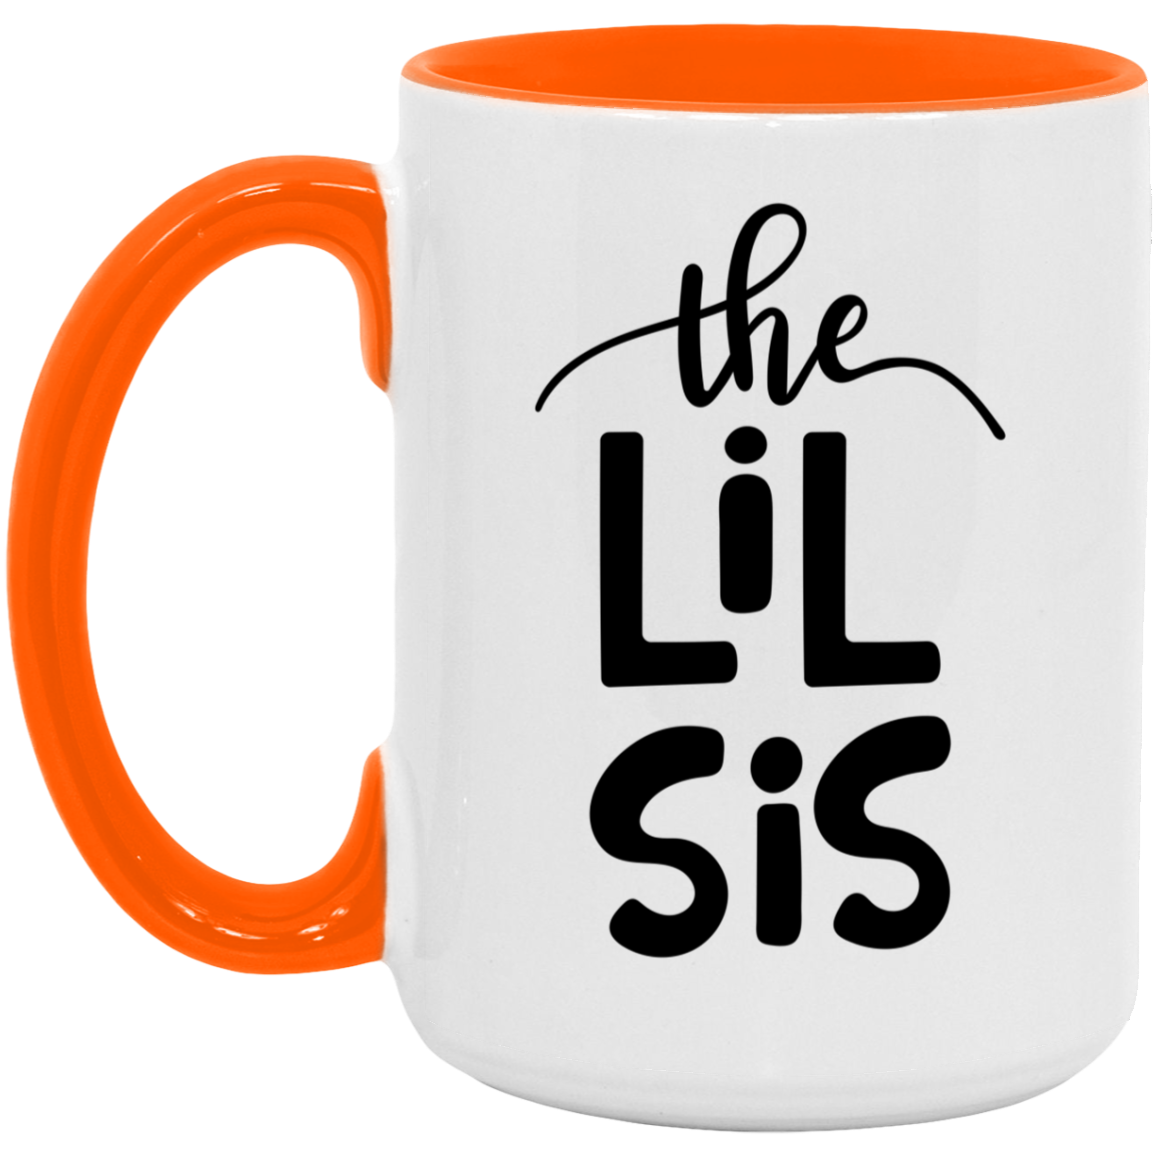 Lil Sis Mug 15 oz. | Gift To Little Sister From Bother or Sister